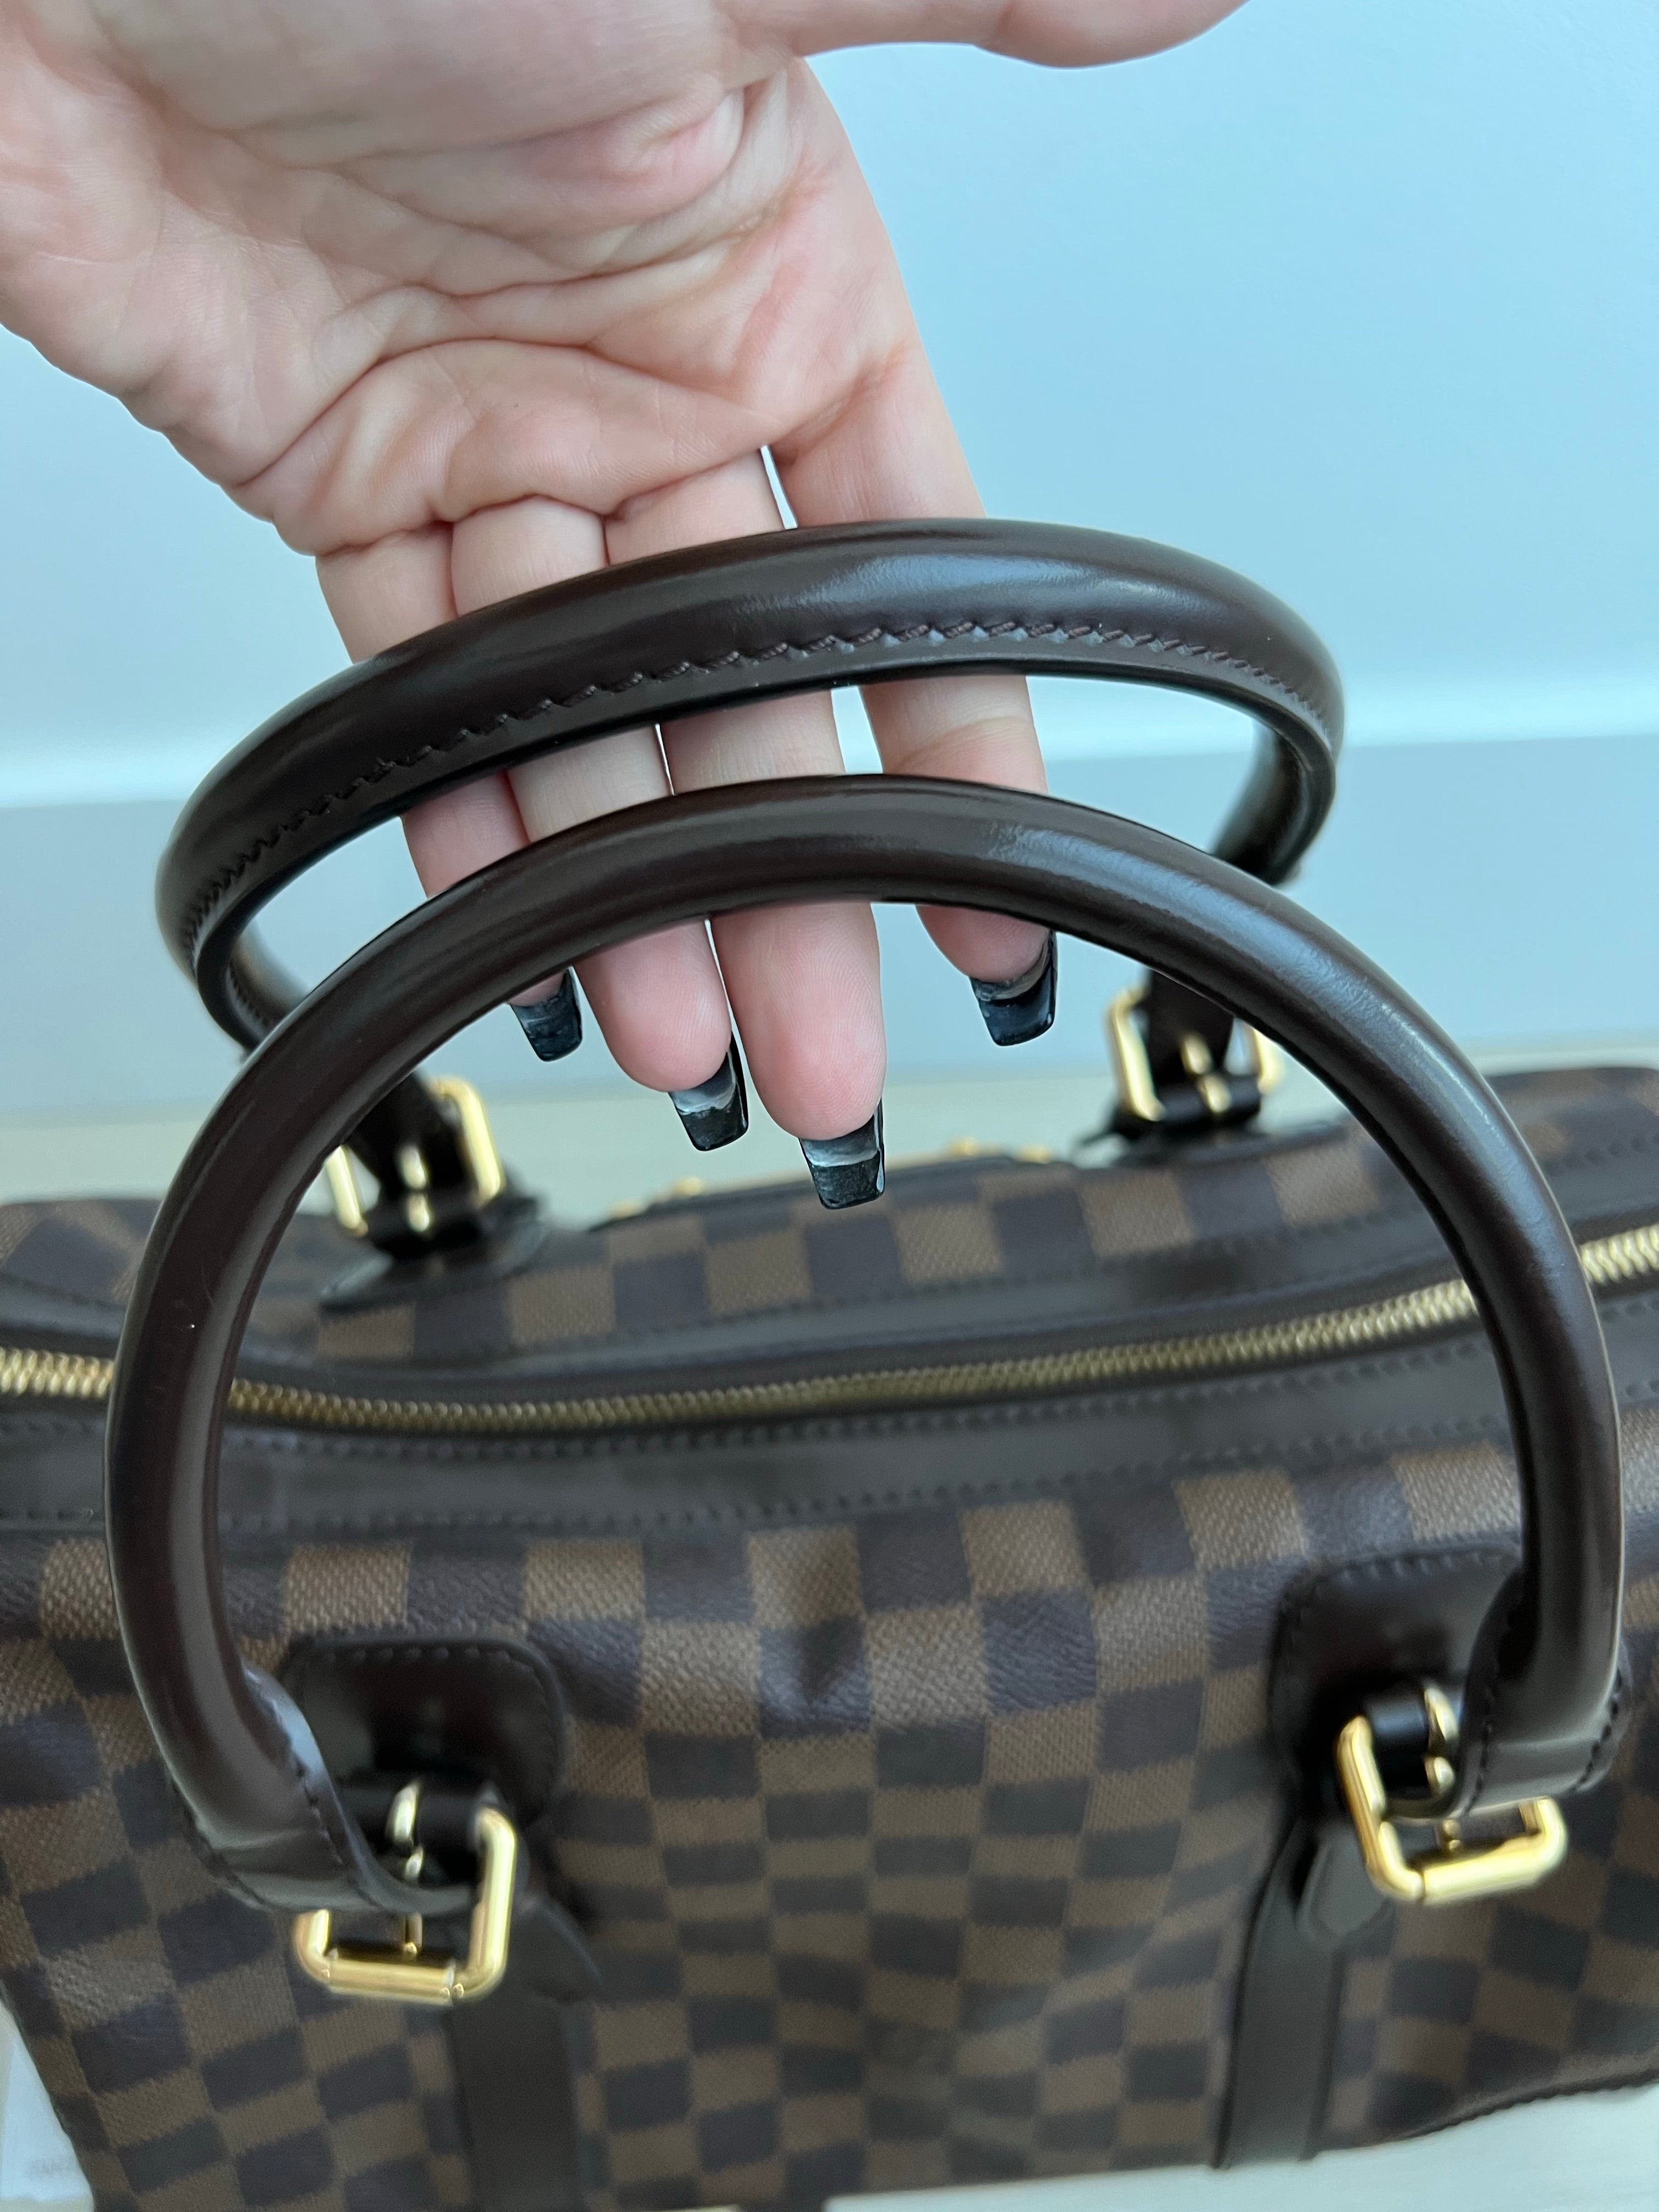 The Louis Vuitton Berkeley is like a Speedy 30 with additional details